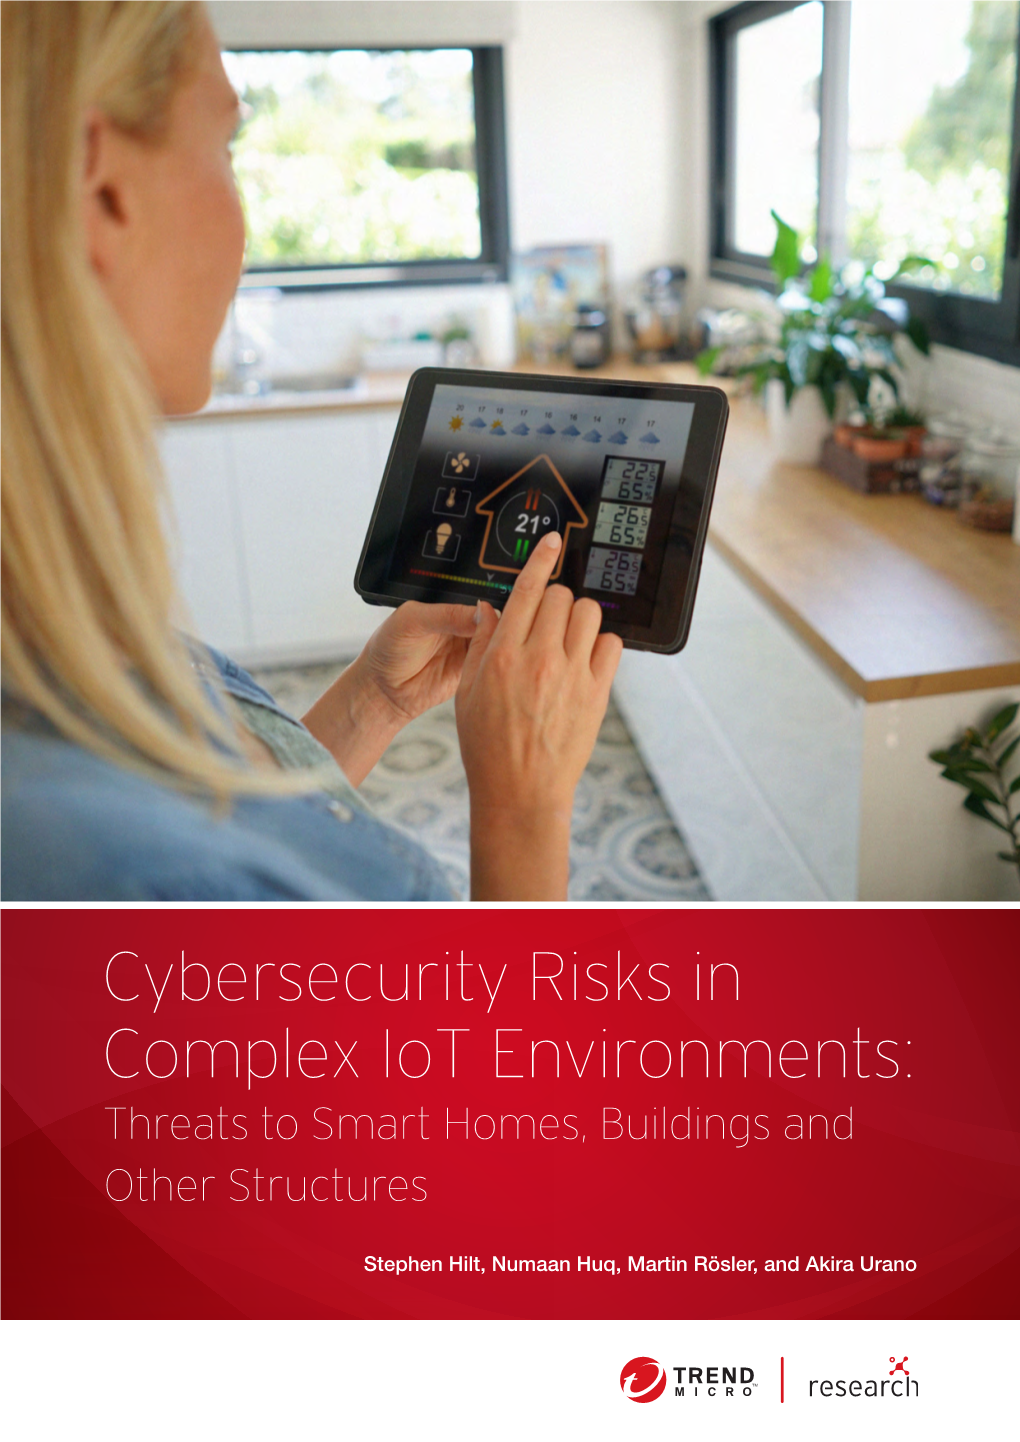 Cybersecurity Risks in Complex Iot Environments: Threats to Smart Homes, Buildings and Other Structures